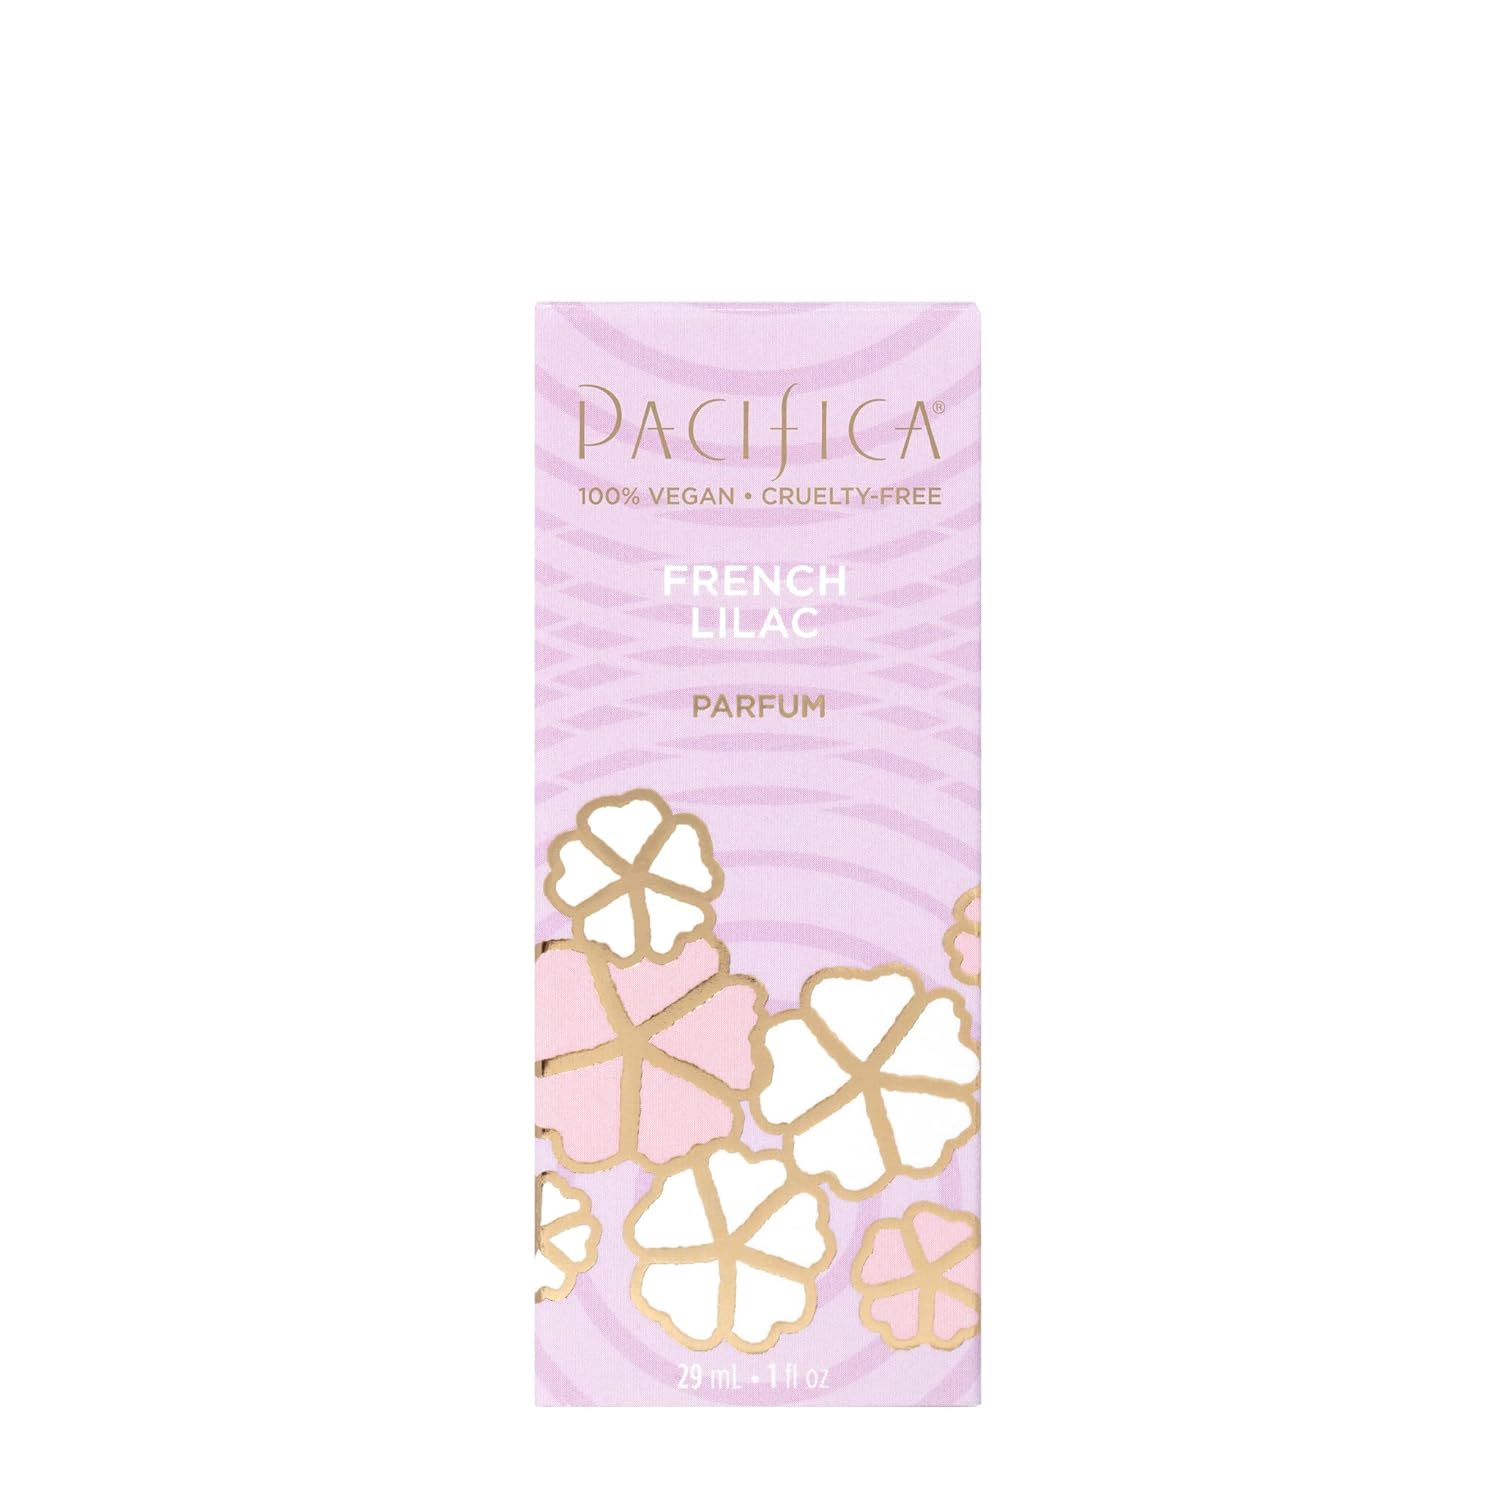 Pacifica Beauty, French Lilac Clean Fragrance Spray Perfume, Floral Scent, Vegan + Cruelty Free, Phthalate-Free, Paraben-Free (Package May Vary) : Beauty & Personal Care